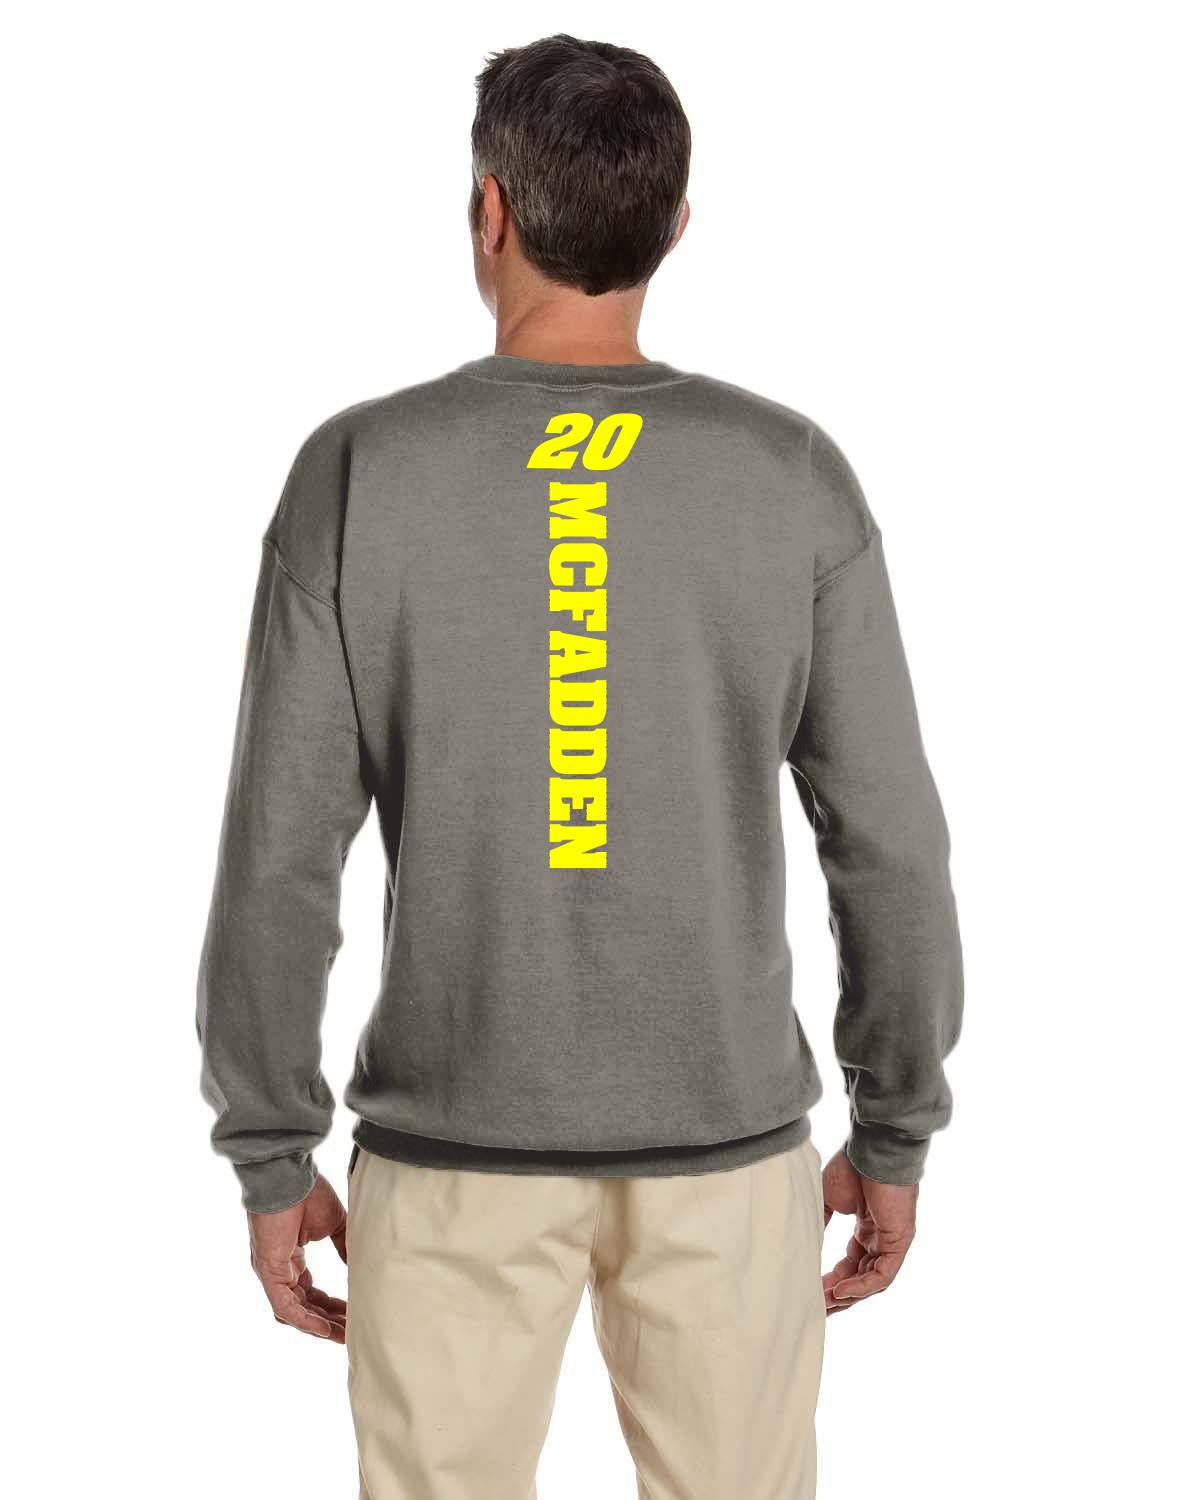 Cole McFadden / Grassroots Racing Name/number Crew neck